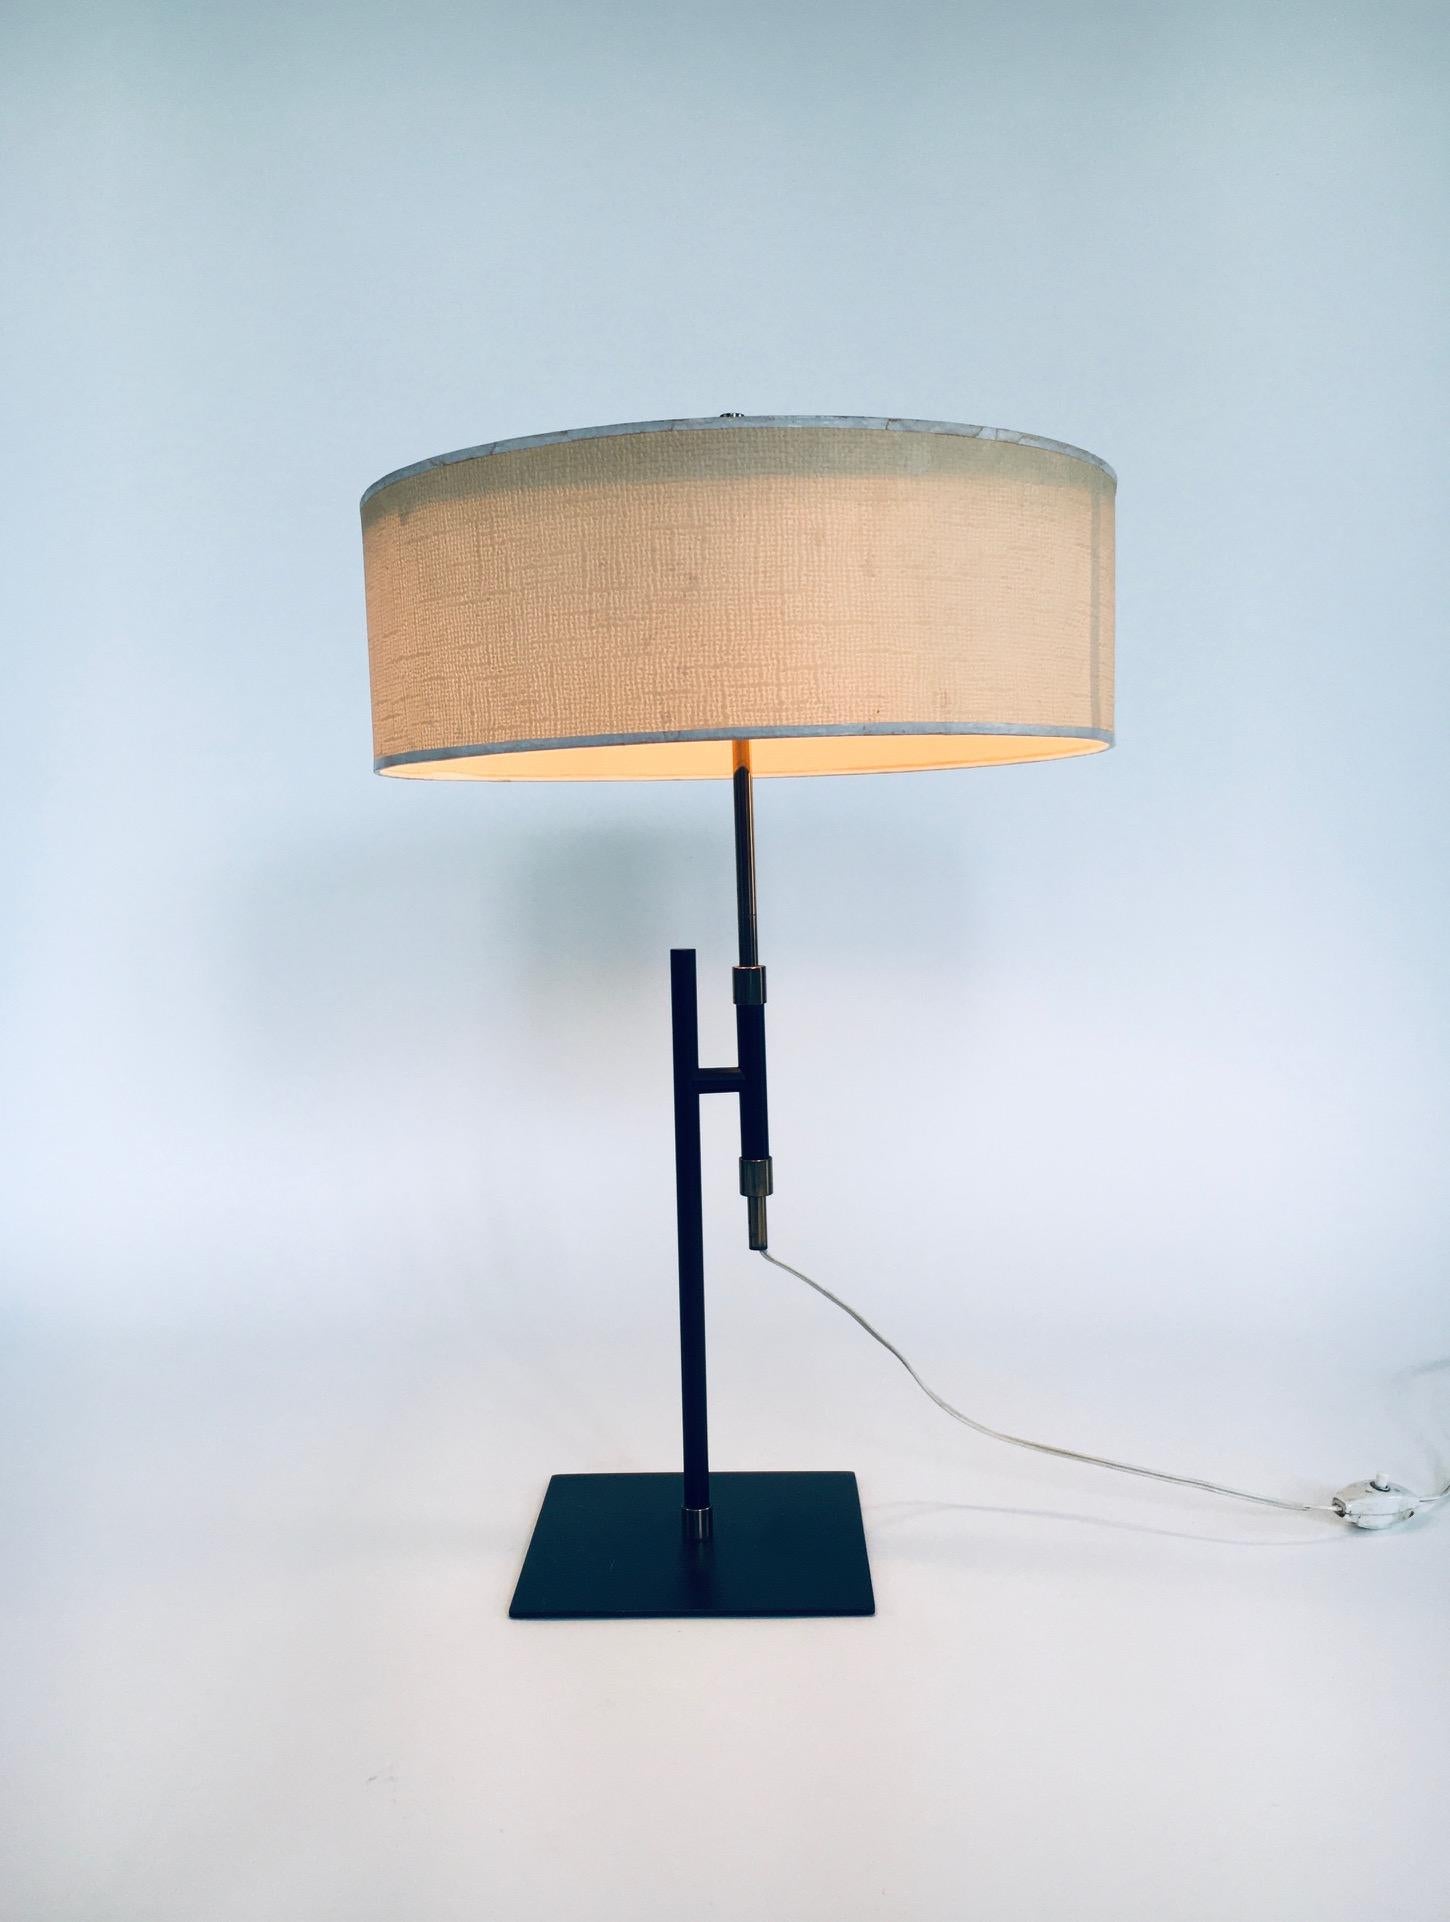 Vintage Midcentury Minimalist Design Table lamp in the manner of Kaiser Idell / Kaiser Leuchten. Made in Germany, 1950's era. Black lacquered metal with brass parts. The difuser on top is white lacquered metal and has it's original cream paper